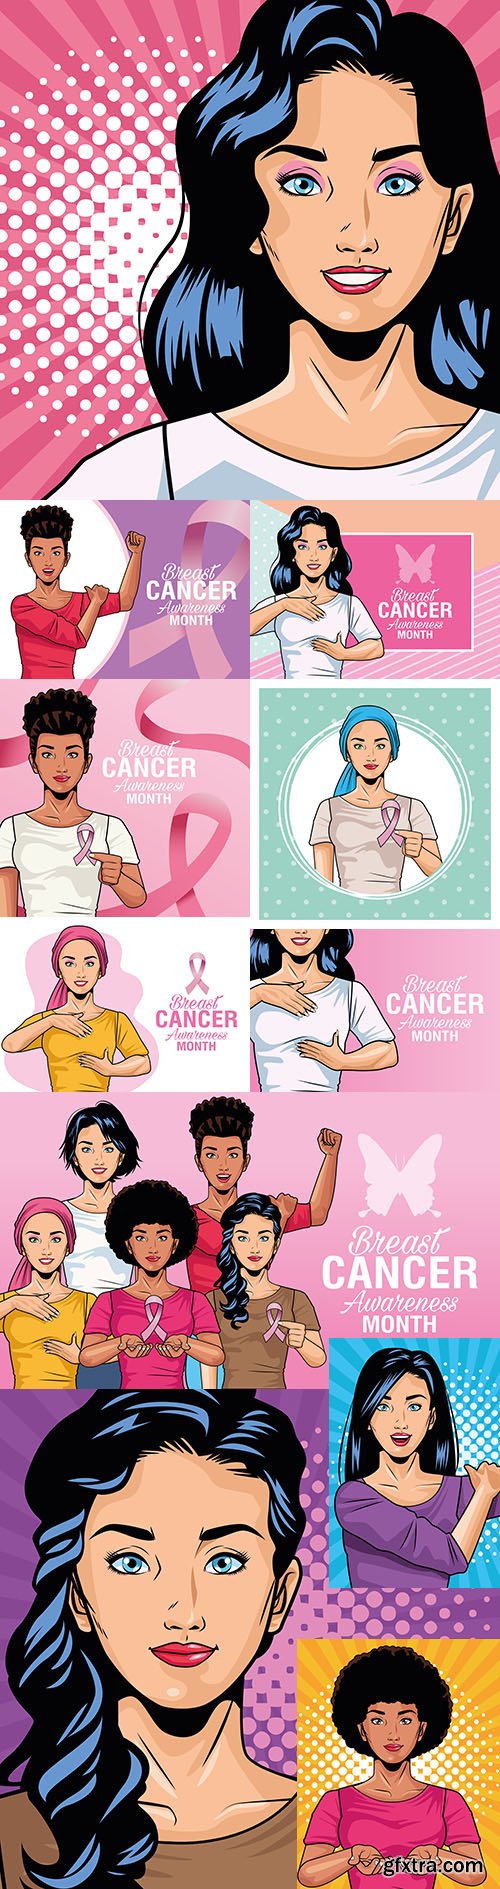 Breast cancer awareness month illustration in pop art style
